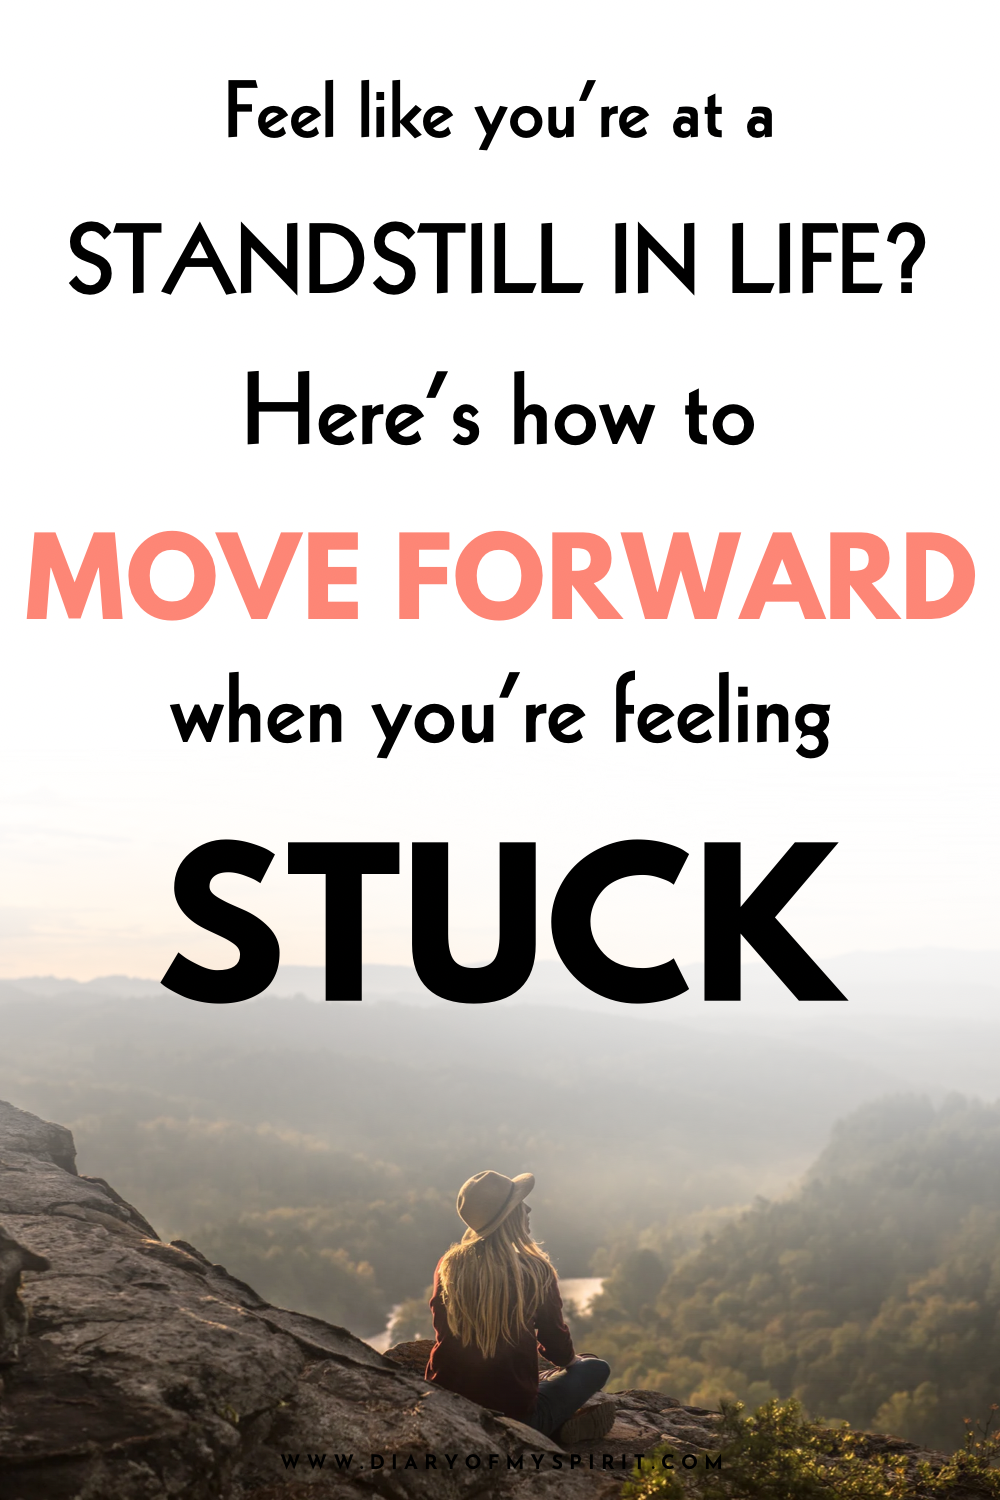 i feel stuck in life. getting unstuck. how to move forward when stuck in a rut. feeling stuck. How to get out of a funk. feeling trapped. being stuck. I am stuck